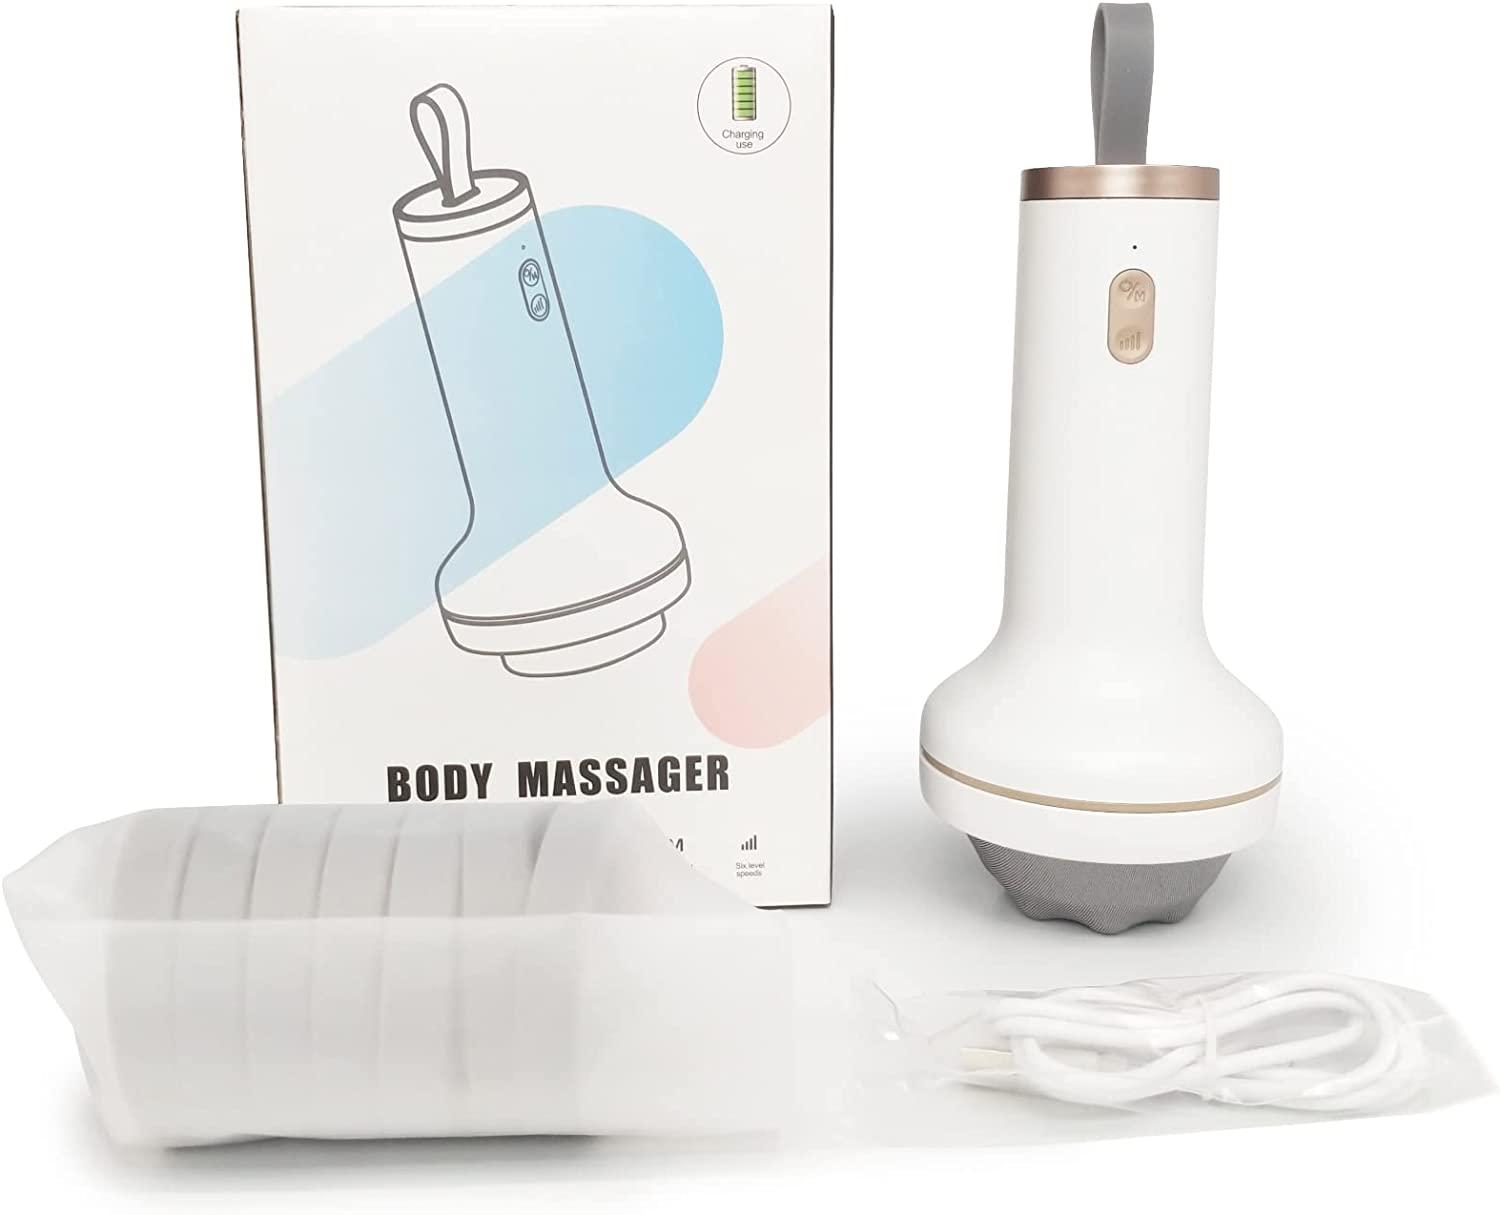 CHAKGER Handheld Cellulite Remover Massager Electric Slimming Massager Full  Body Massager with 8 Massage Heads Used for The Massage of Muscles,Legs,  Butt, Thighs, Drain Massage… (Wireless Massager)